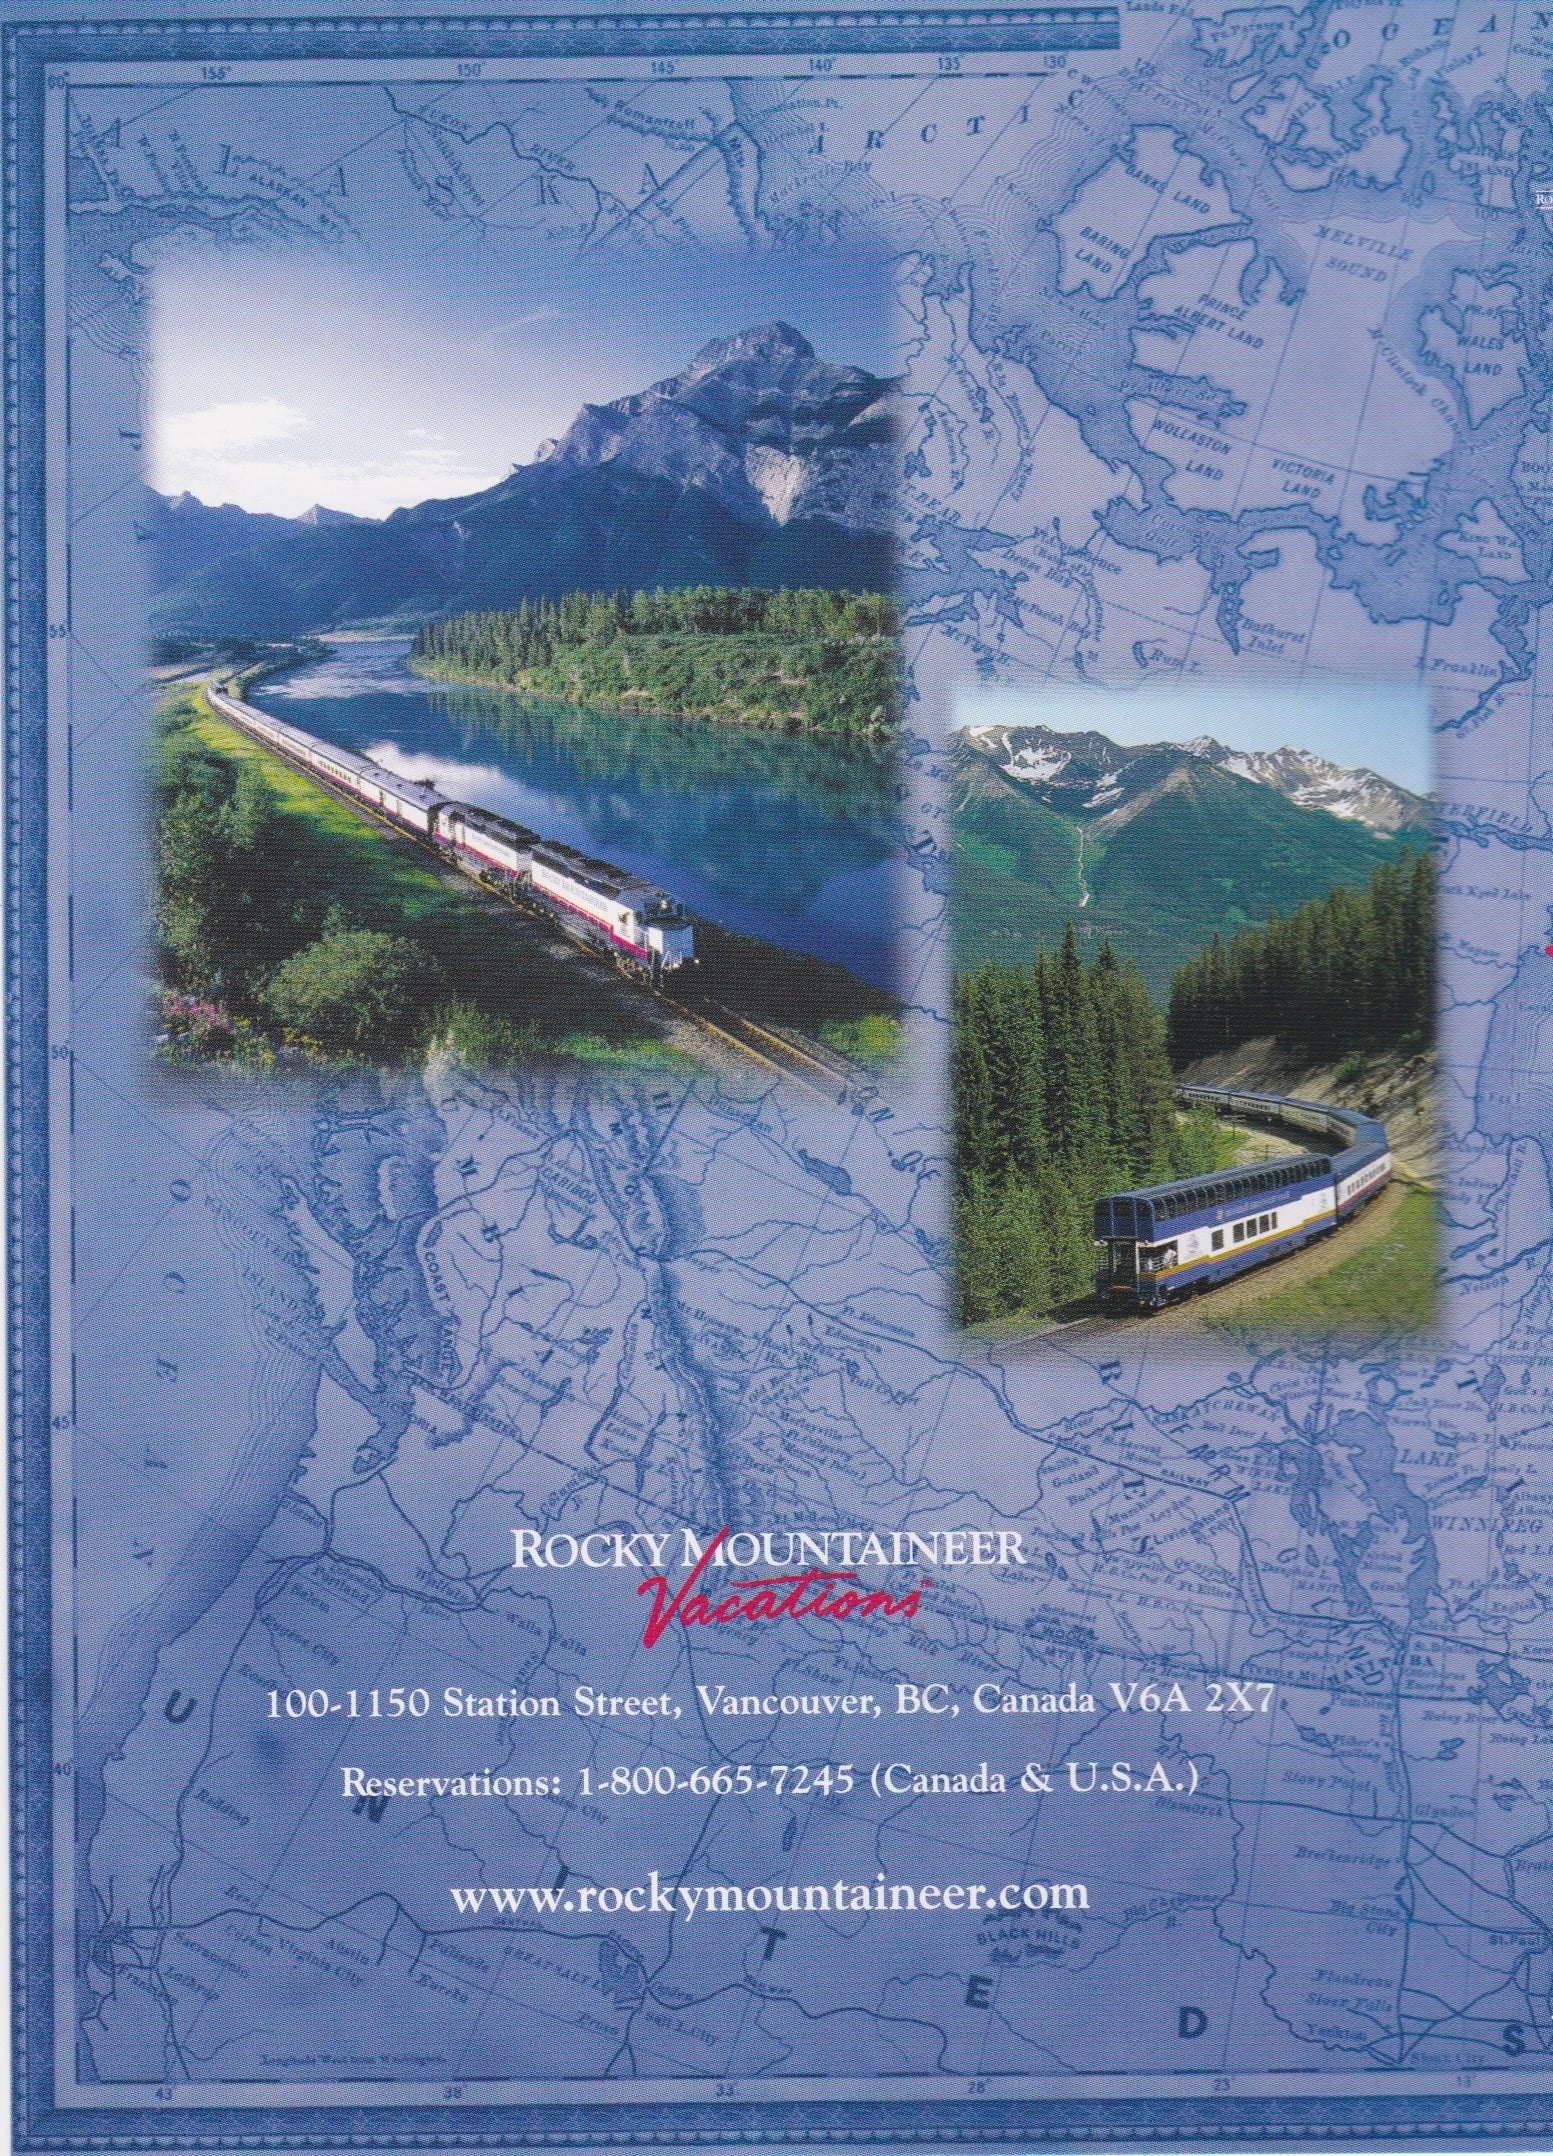 Rocky Mountaineer: The Most Spectacular Train Trip in the World